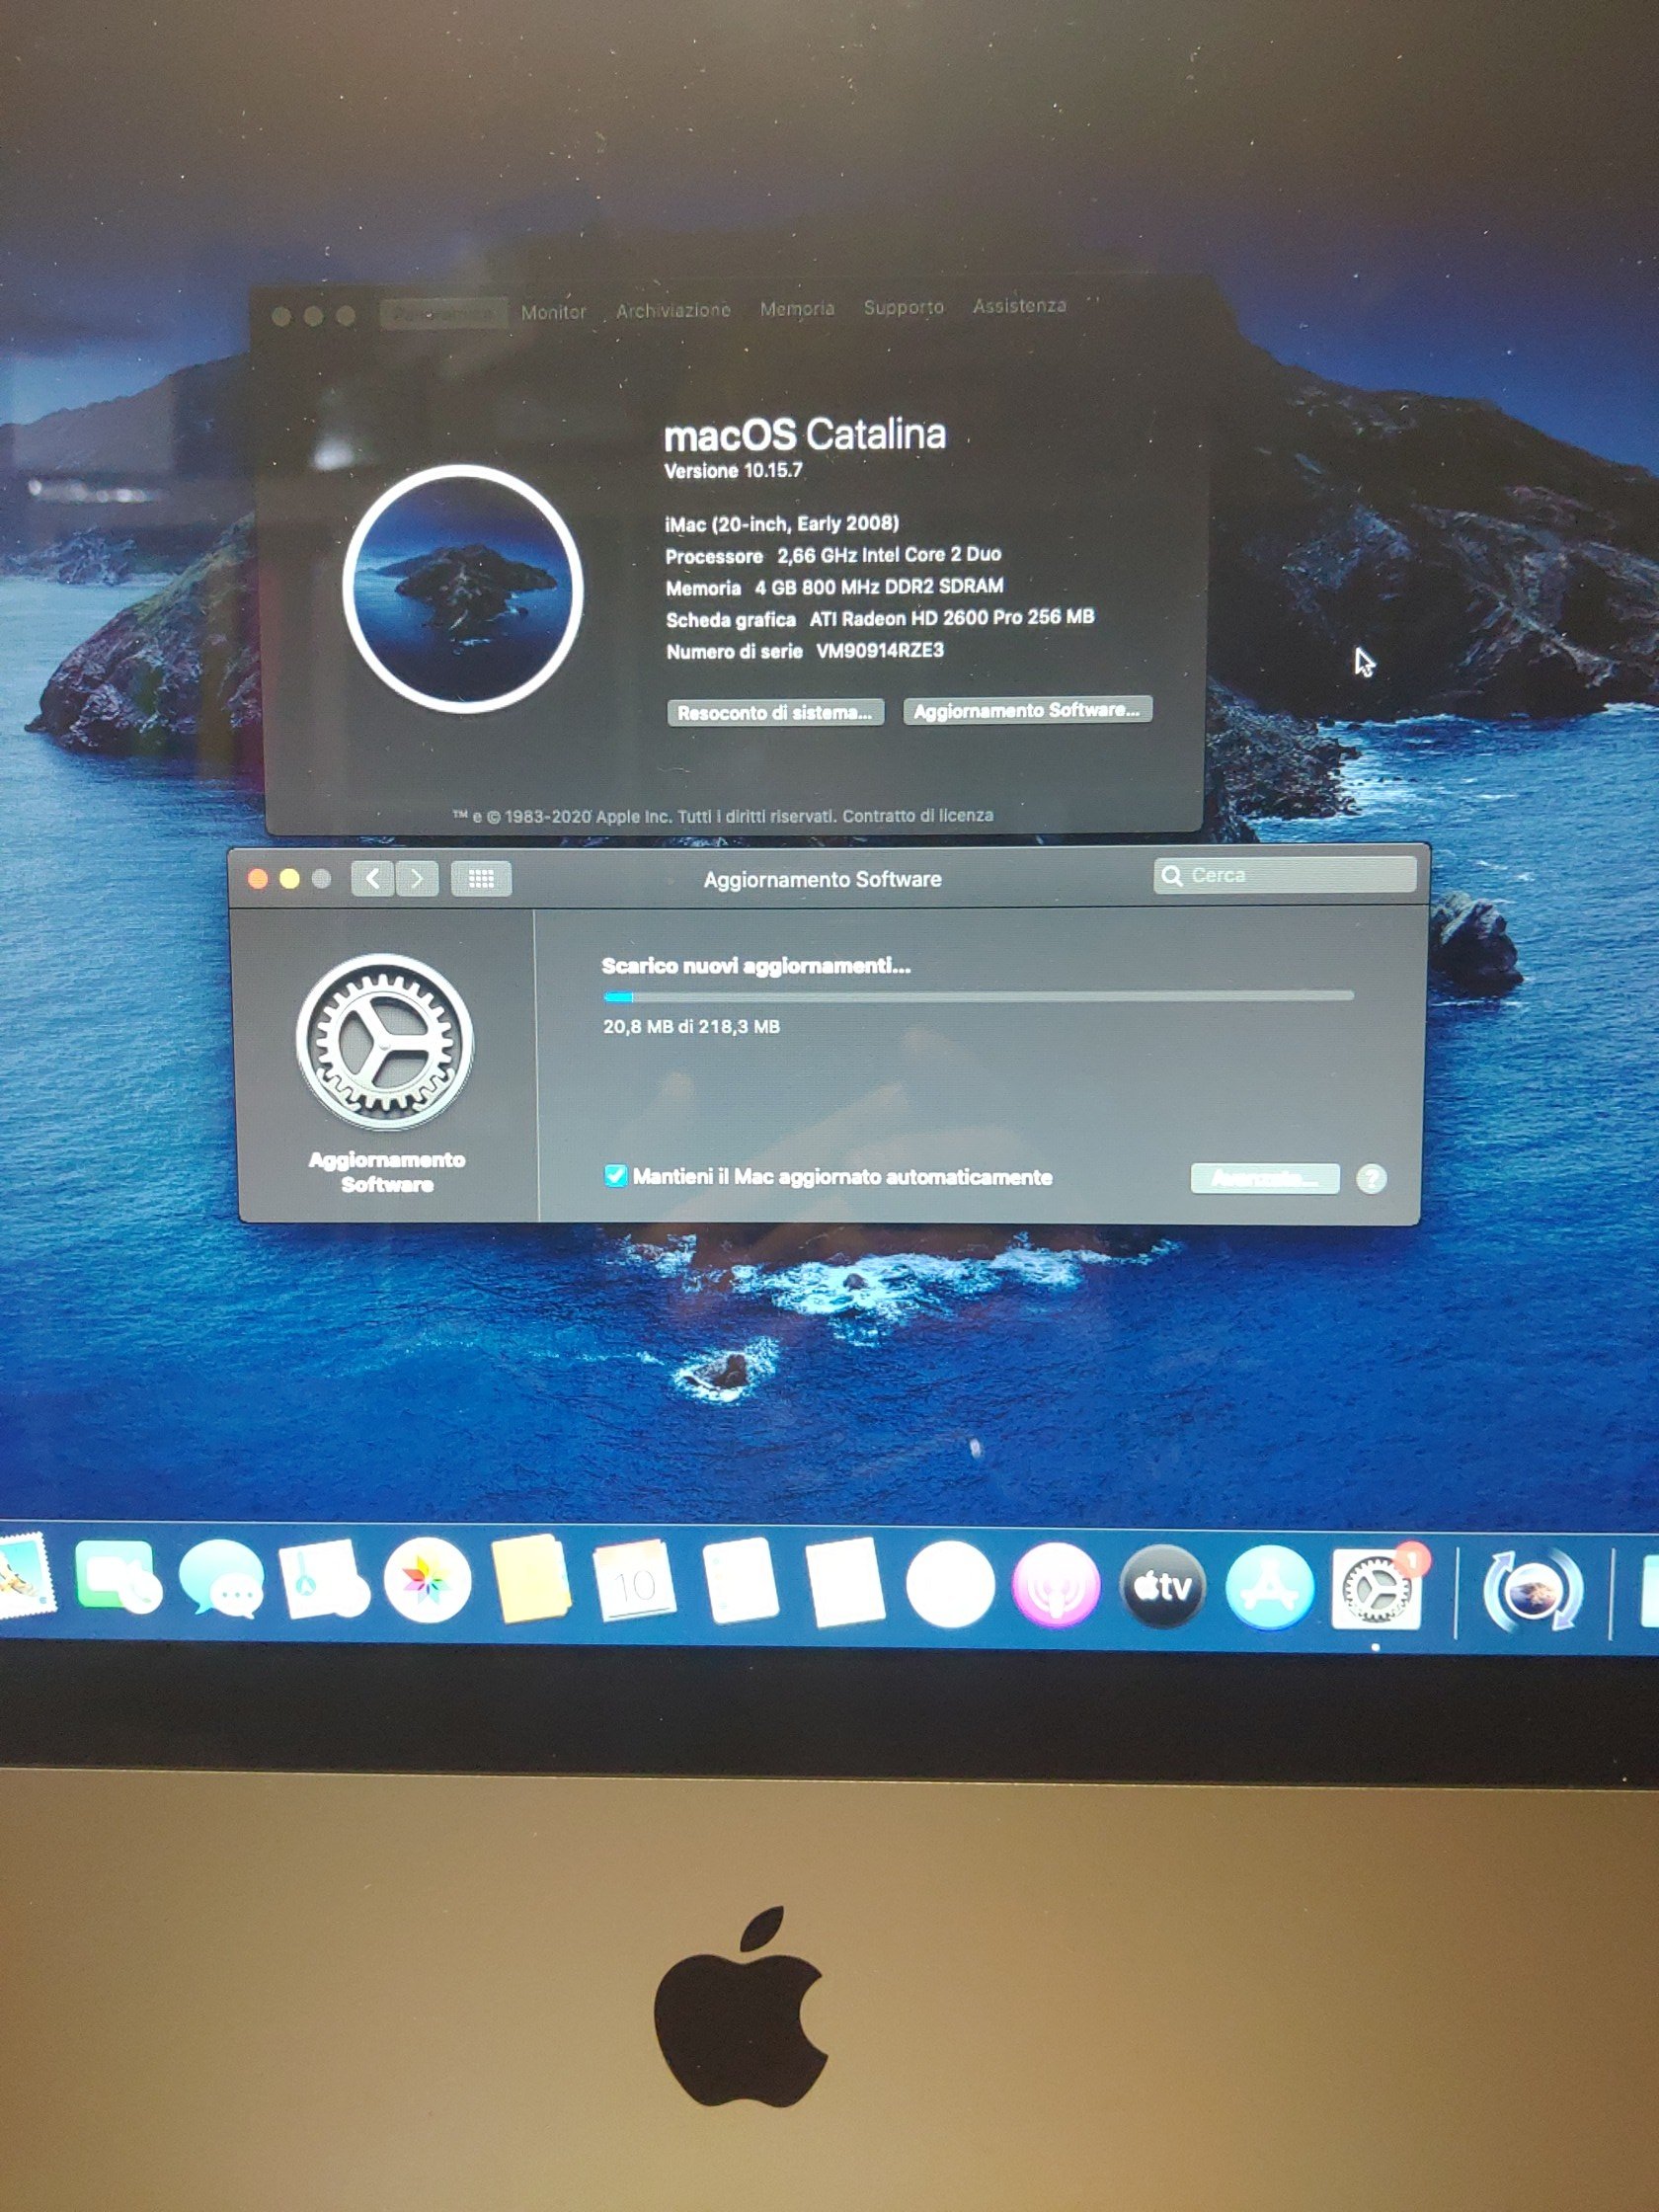 peppe on Twitter: "Mac OS Catalina on iMac 2008... Stay update Safari  https://t.co/oJAg9y4B6X" / Twitter